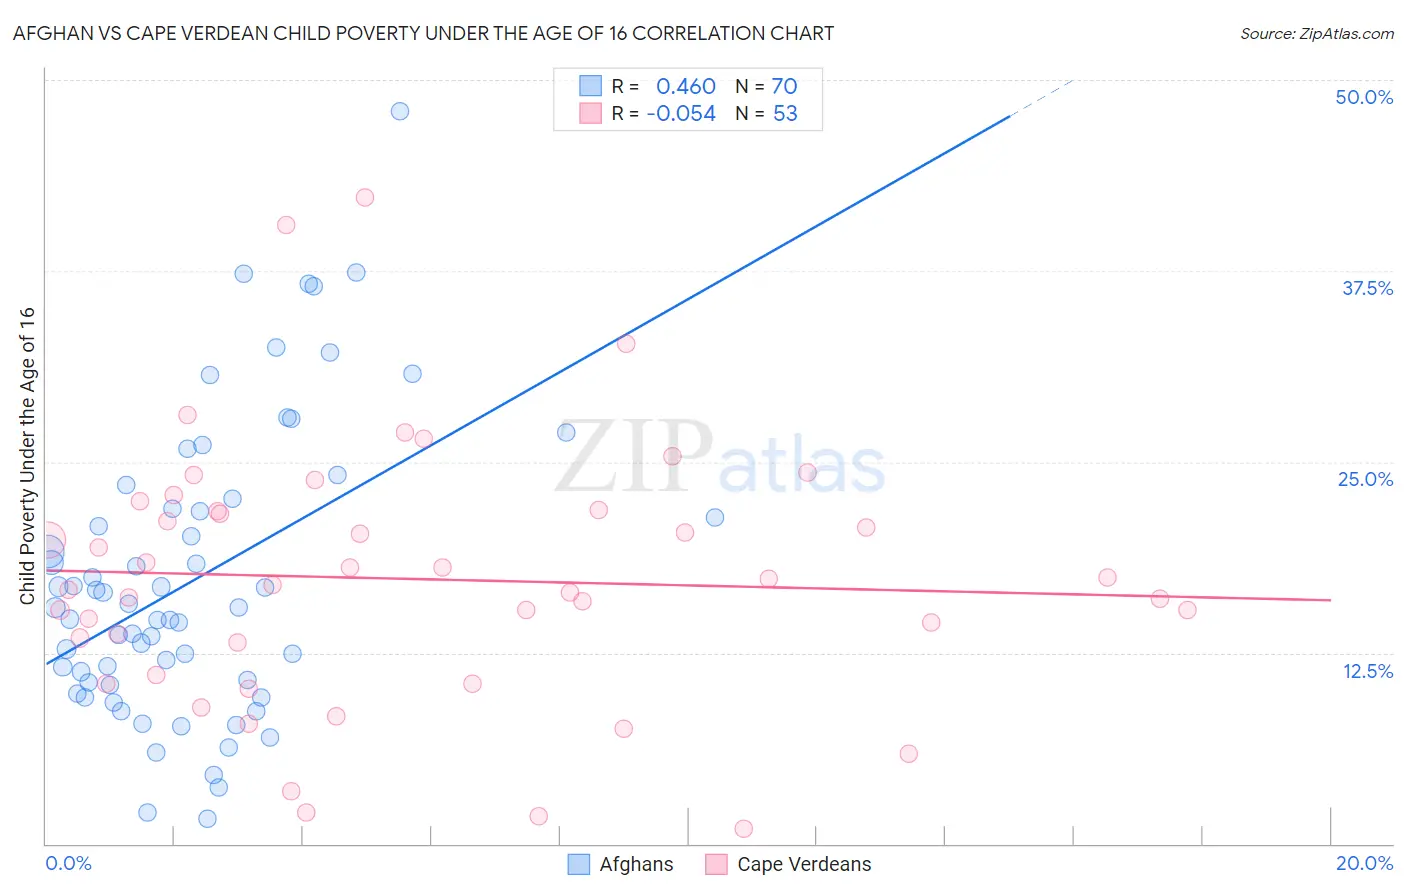 Afghan vs Cape Verdean Child Poverty Under the Age of 16